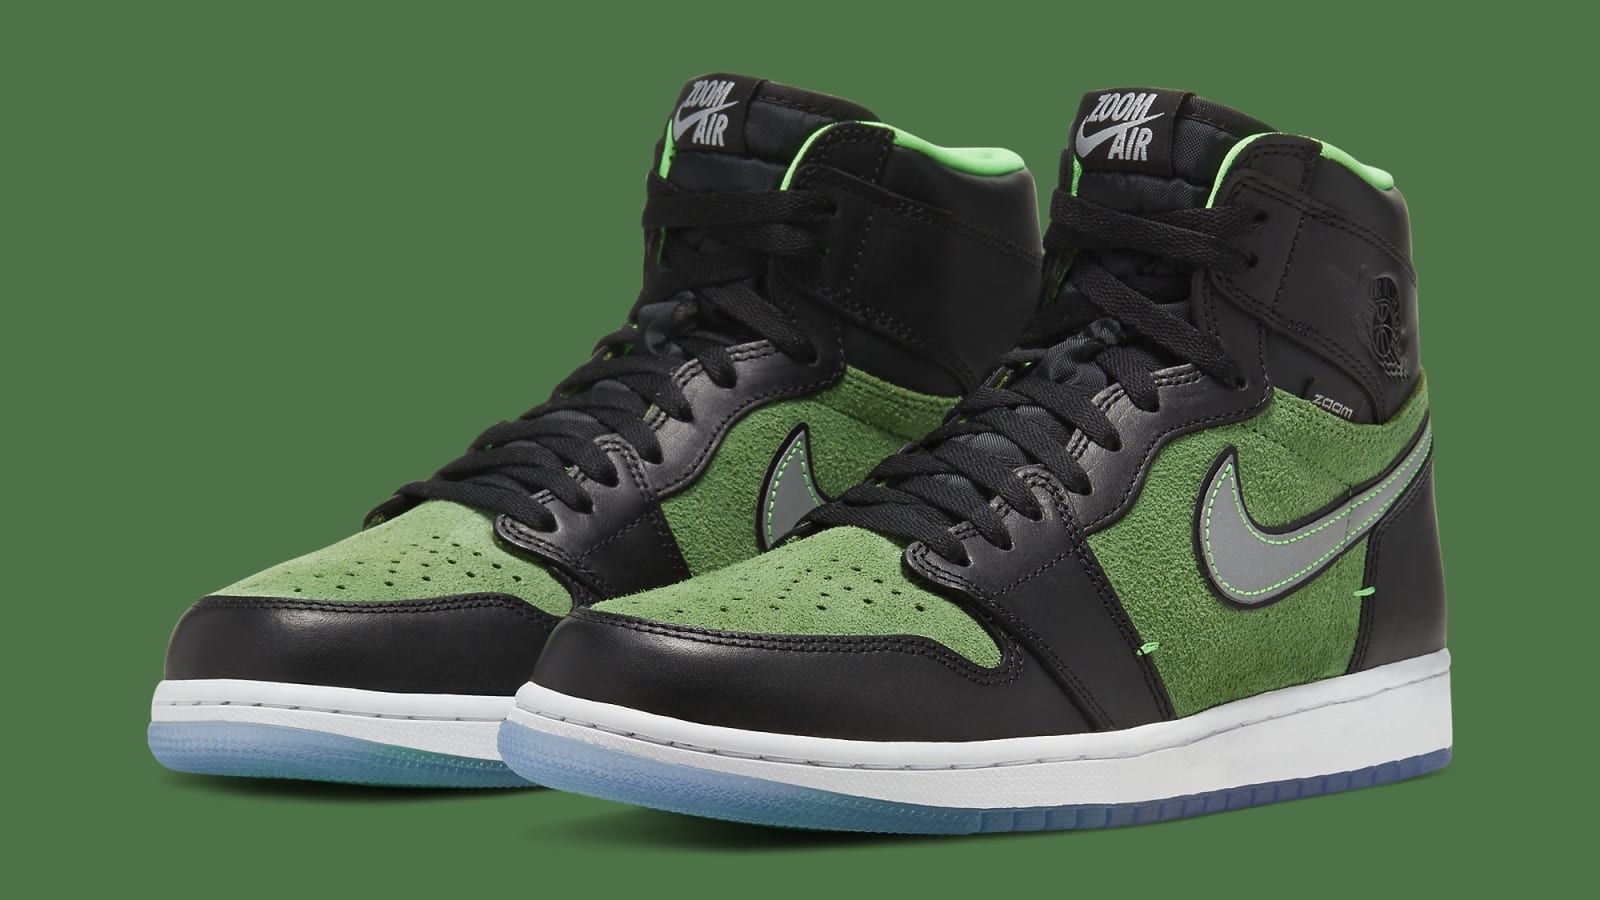 Air Jordan 1 High Zoom &quot;Rage Green&quot; Officially Revealed: Photos